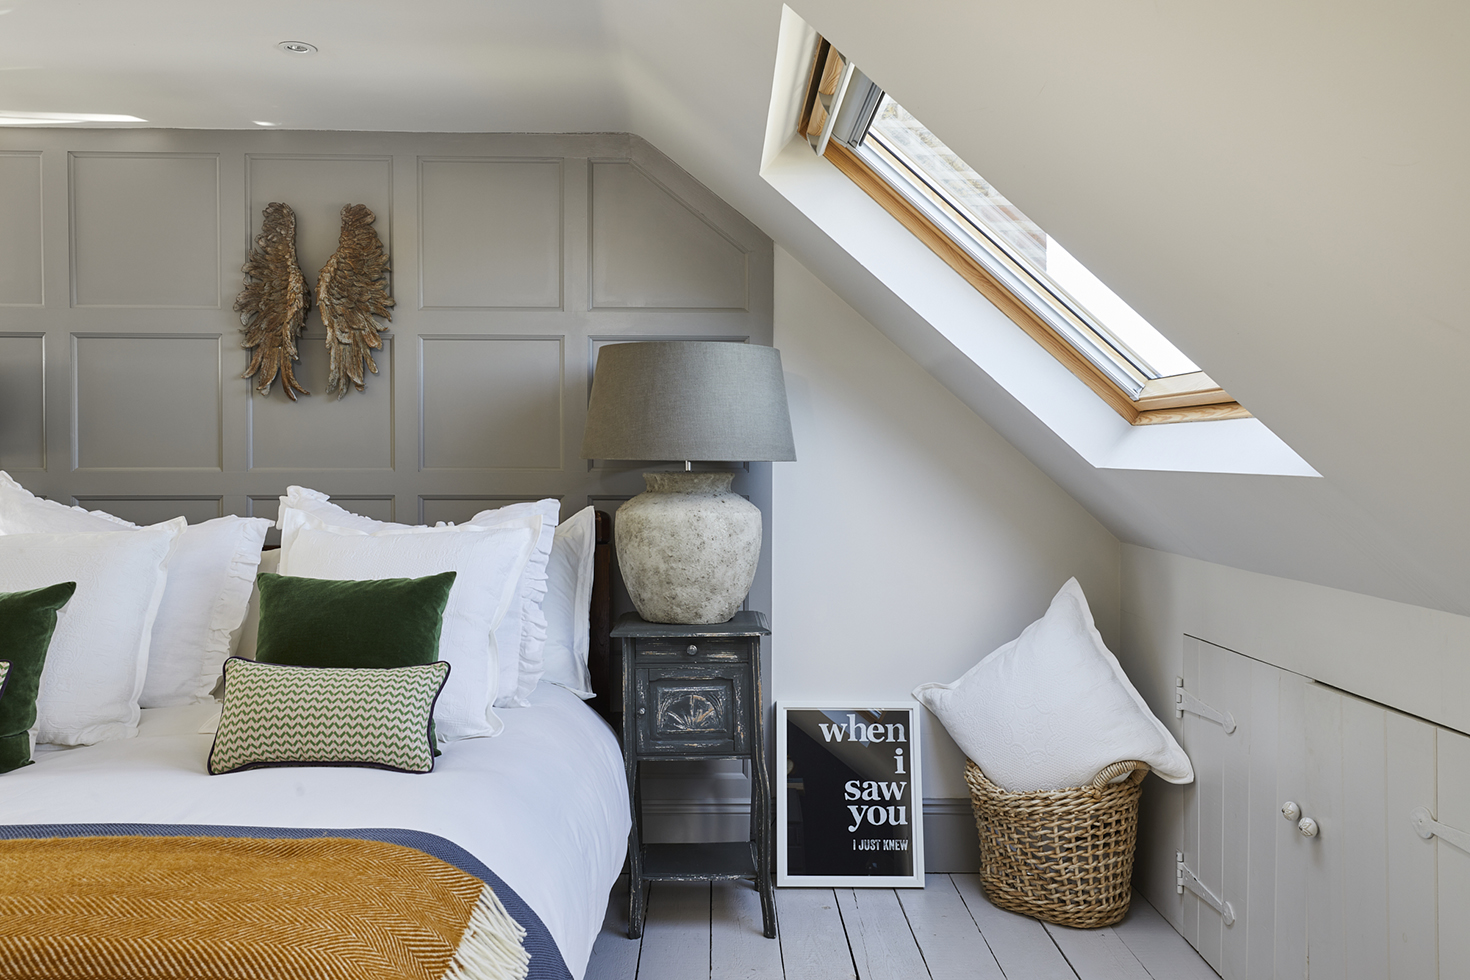 Loft conversions beginner's guide: Everything you need to know | Homebuilding